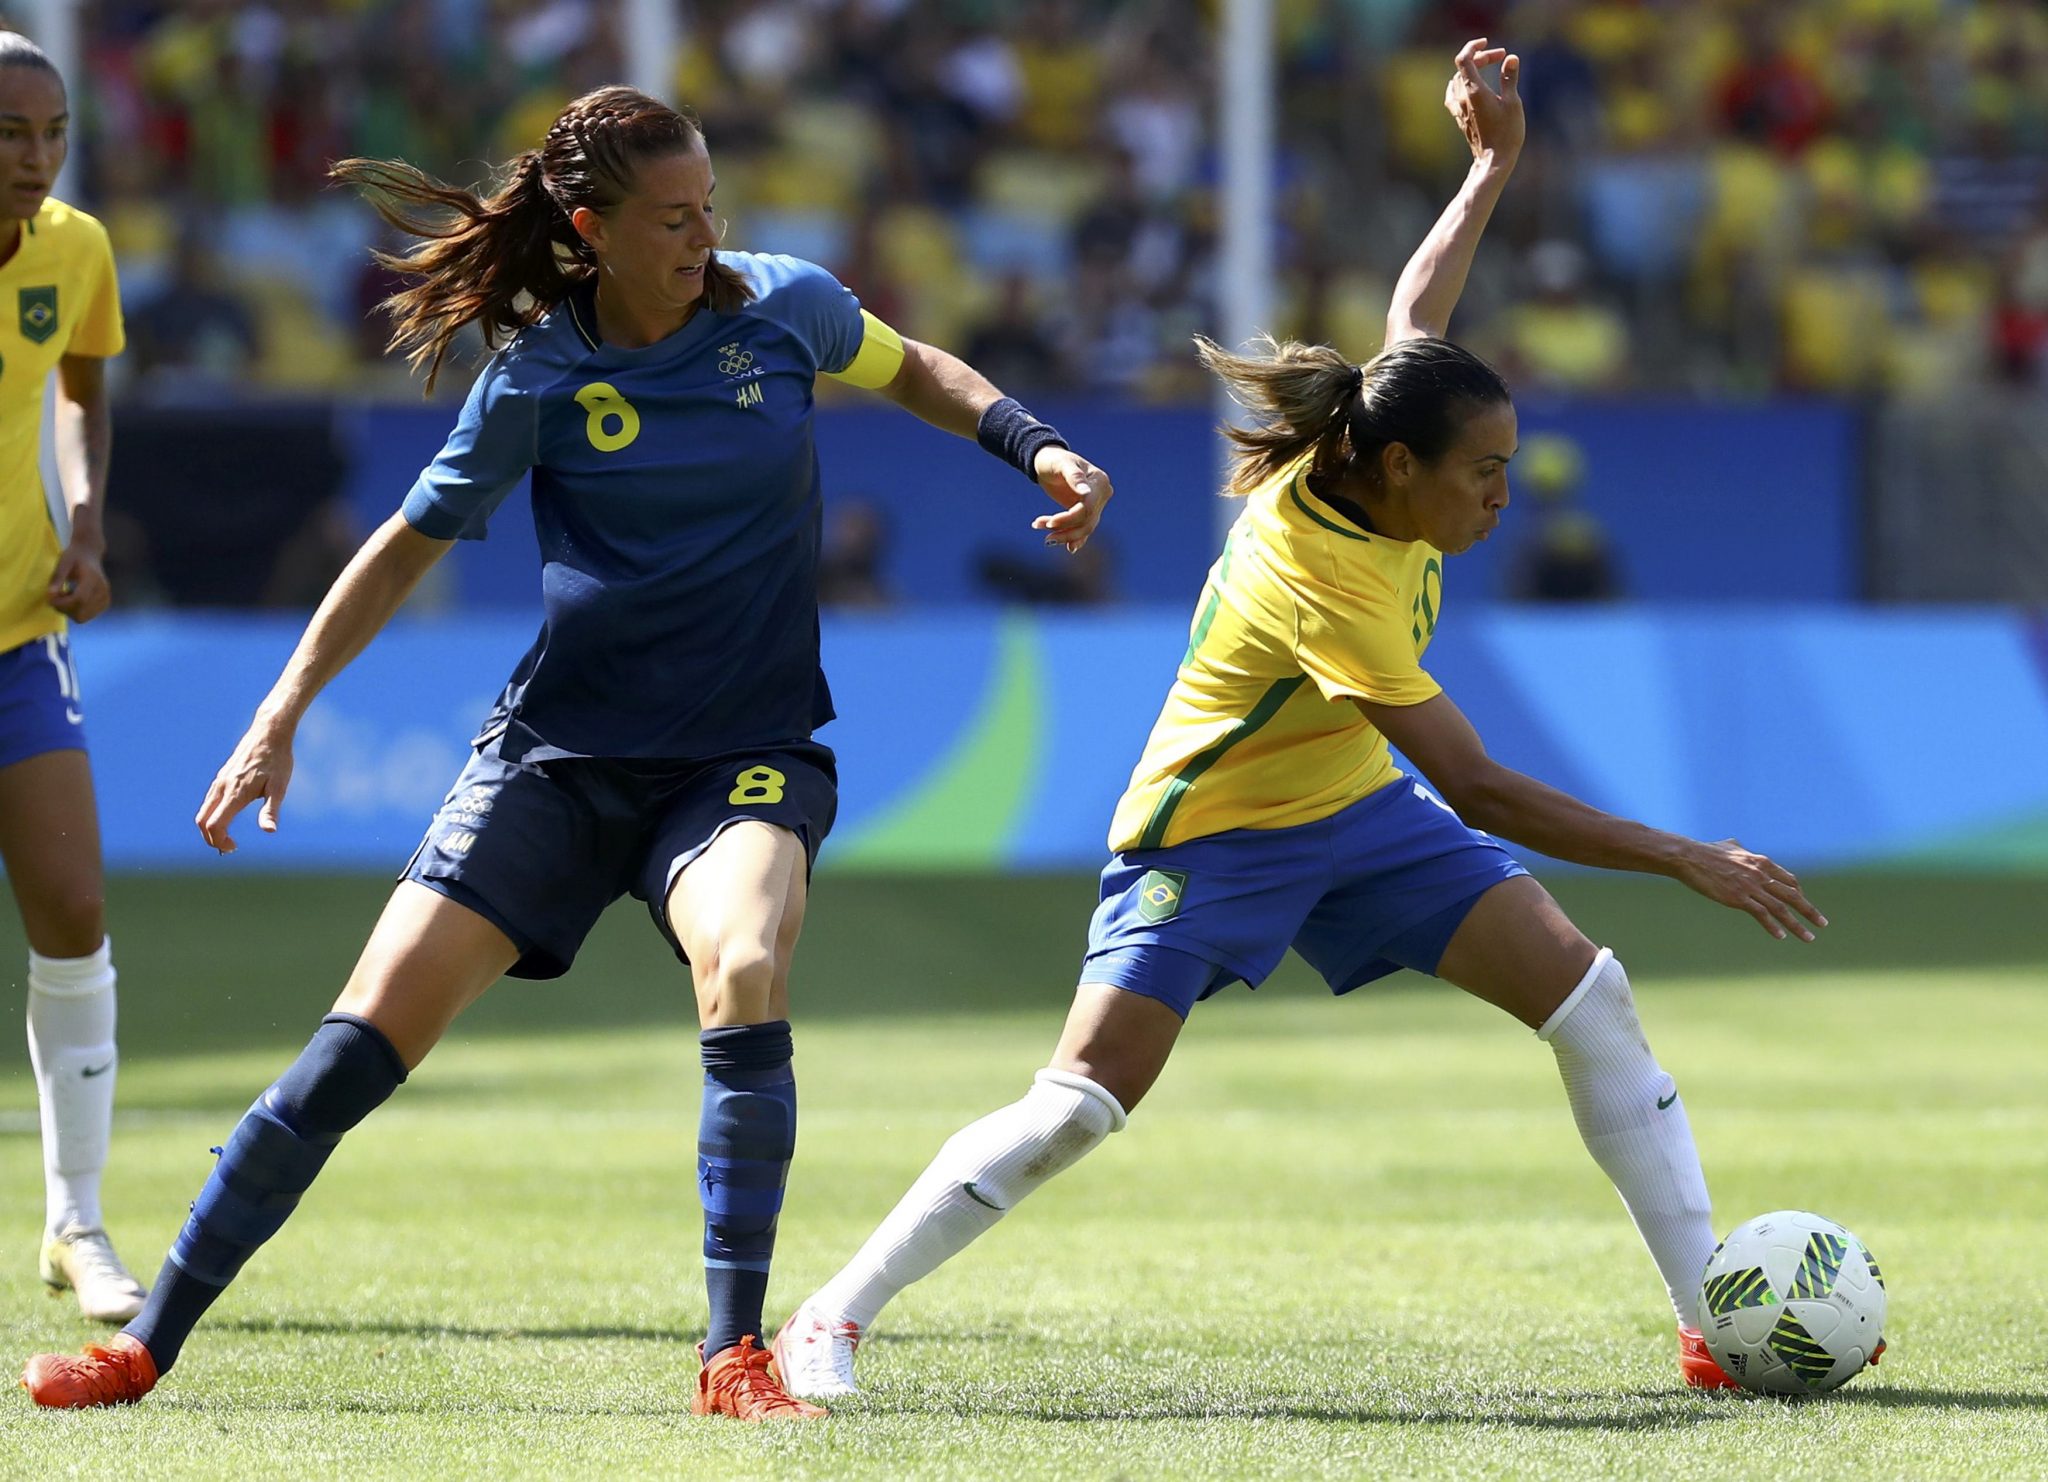 2016 Rio Olympics - Soccer - Semifinal - Women's Football Tournament Semifinal Brazil v Sweden - Maracana - Rio de Janeiro, Brazil - 16/08/2016. Marta (BRA) of Brazil and Lotta Schelin (SWE) of Sweden (L) compete. REUTERS/Leonhard Foeger FOR EDITORIAL USE ONLY. NOT FOR SALE FOR MARKETING OR ADVERTISING CAMPAIGNS.